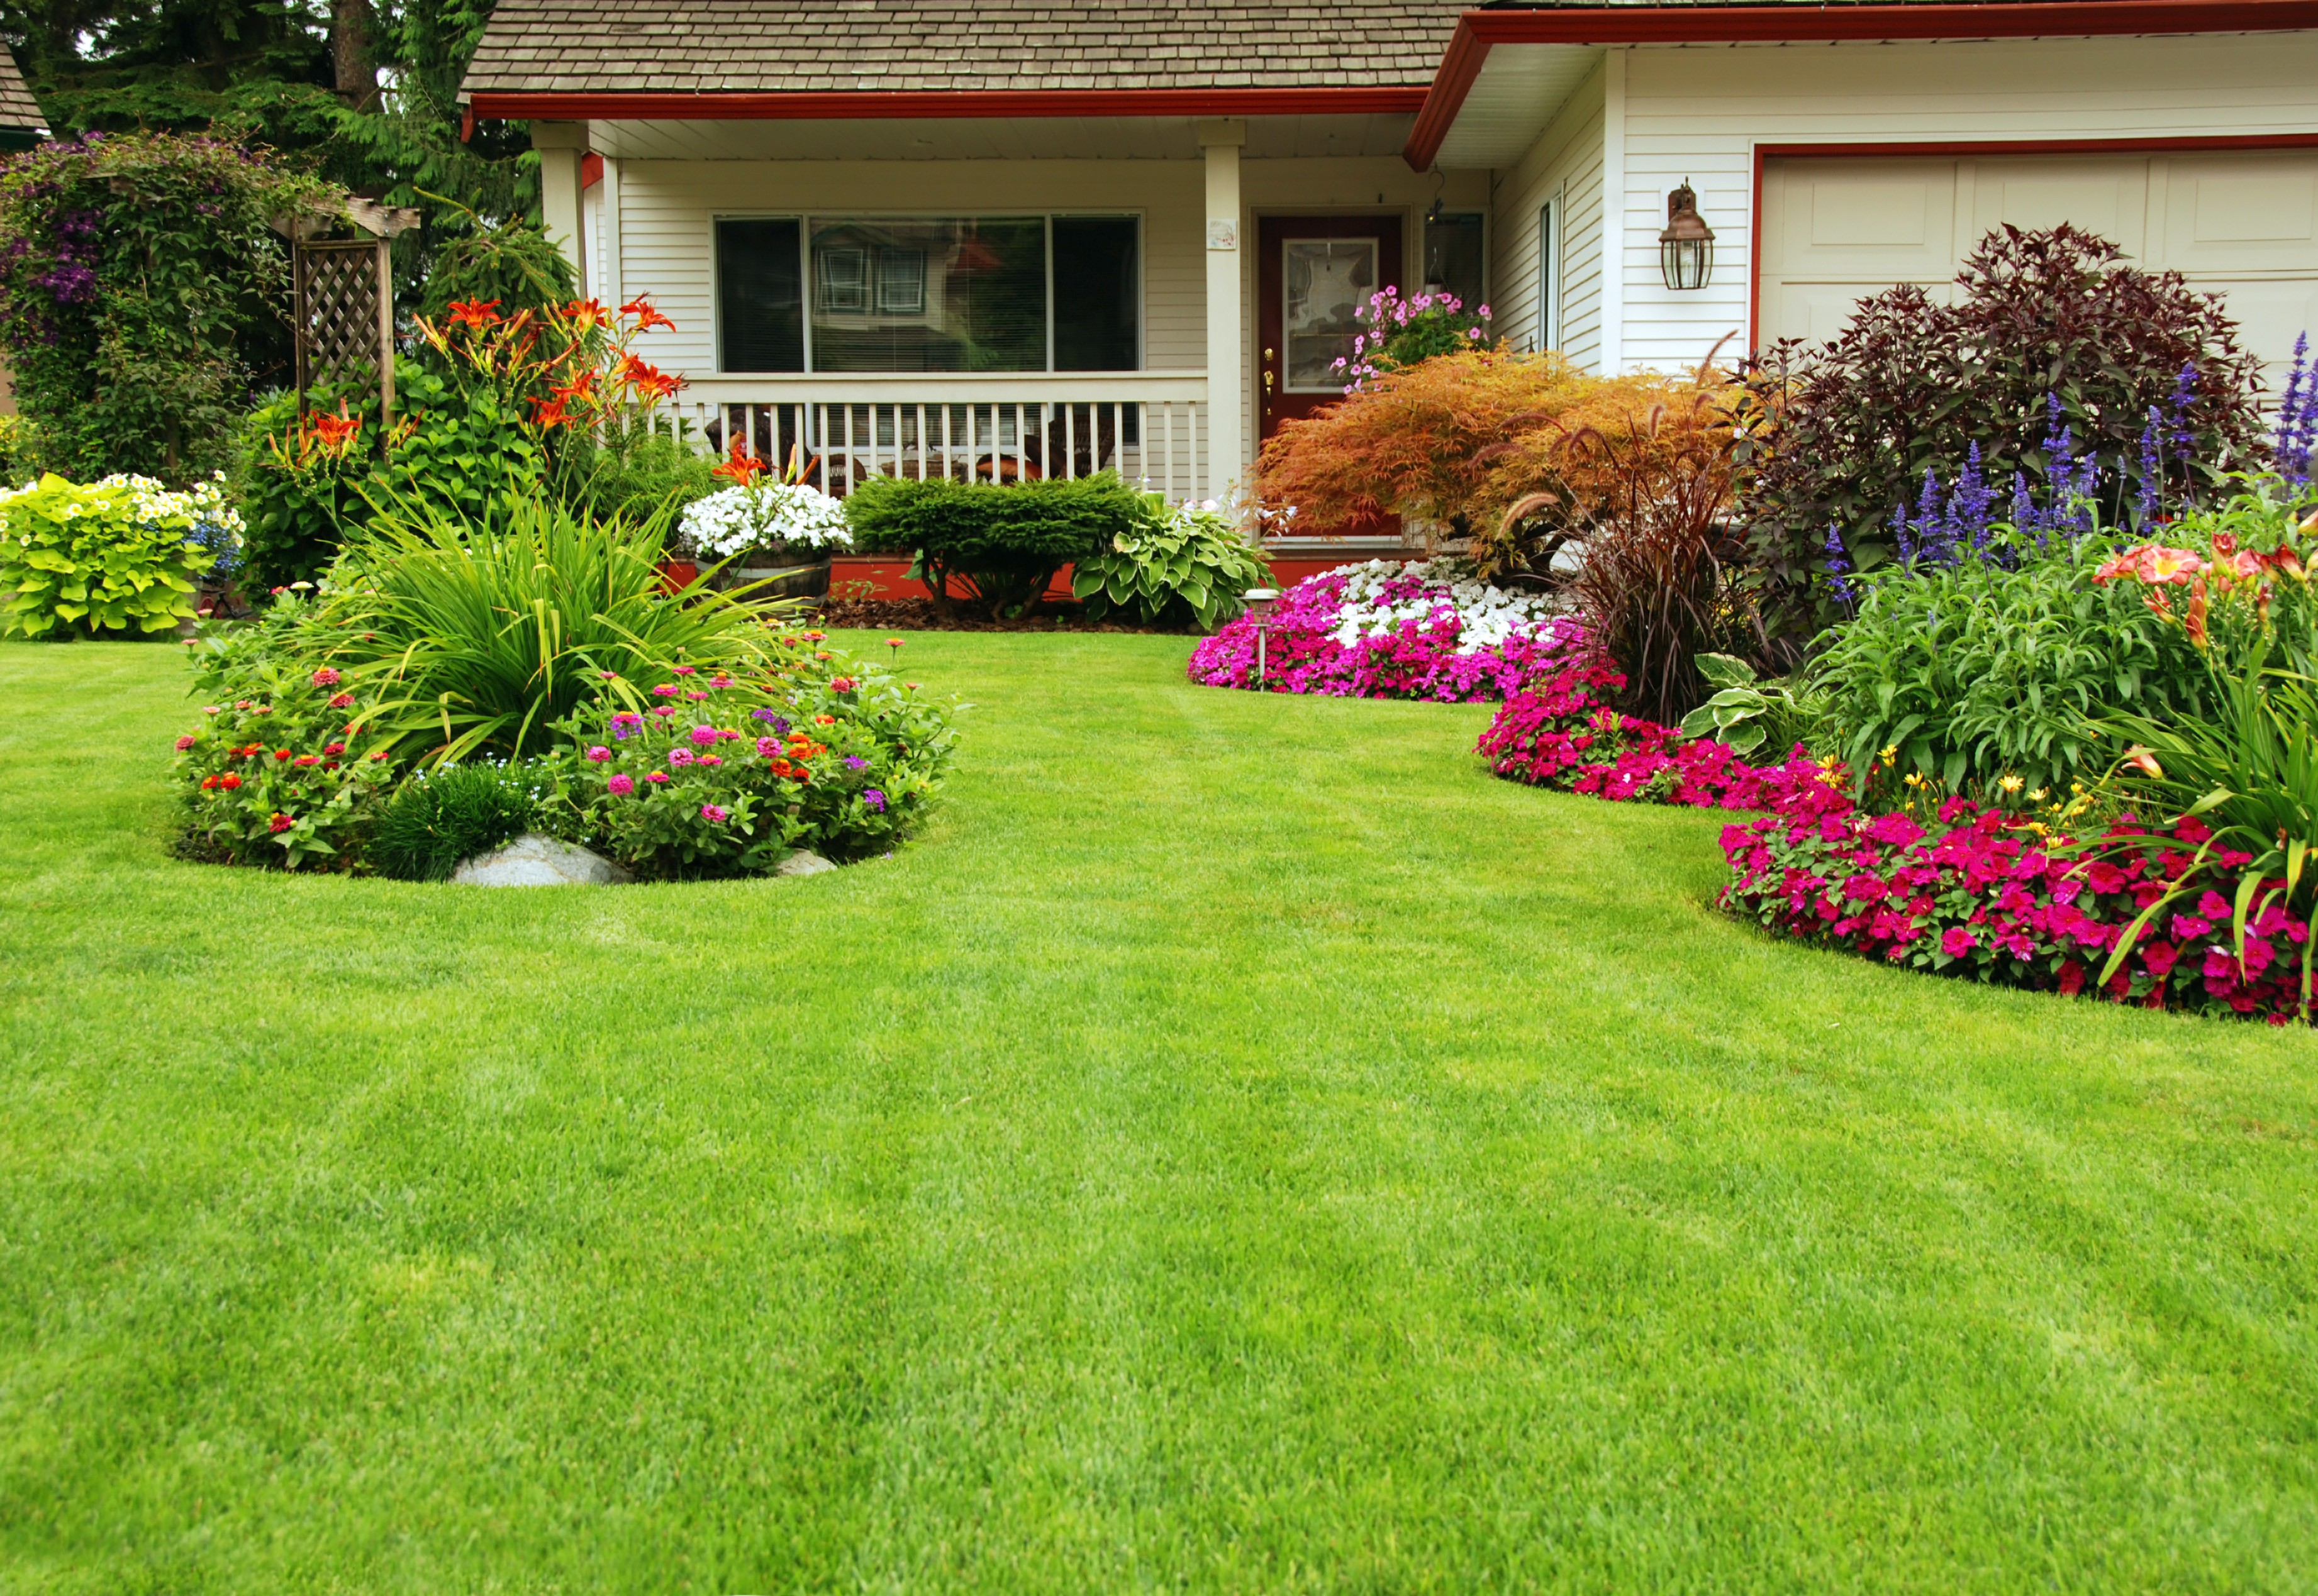 Backyard Landscaping Ideas And Designs, Great Backyard Landscaping Ideas